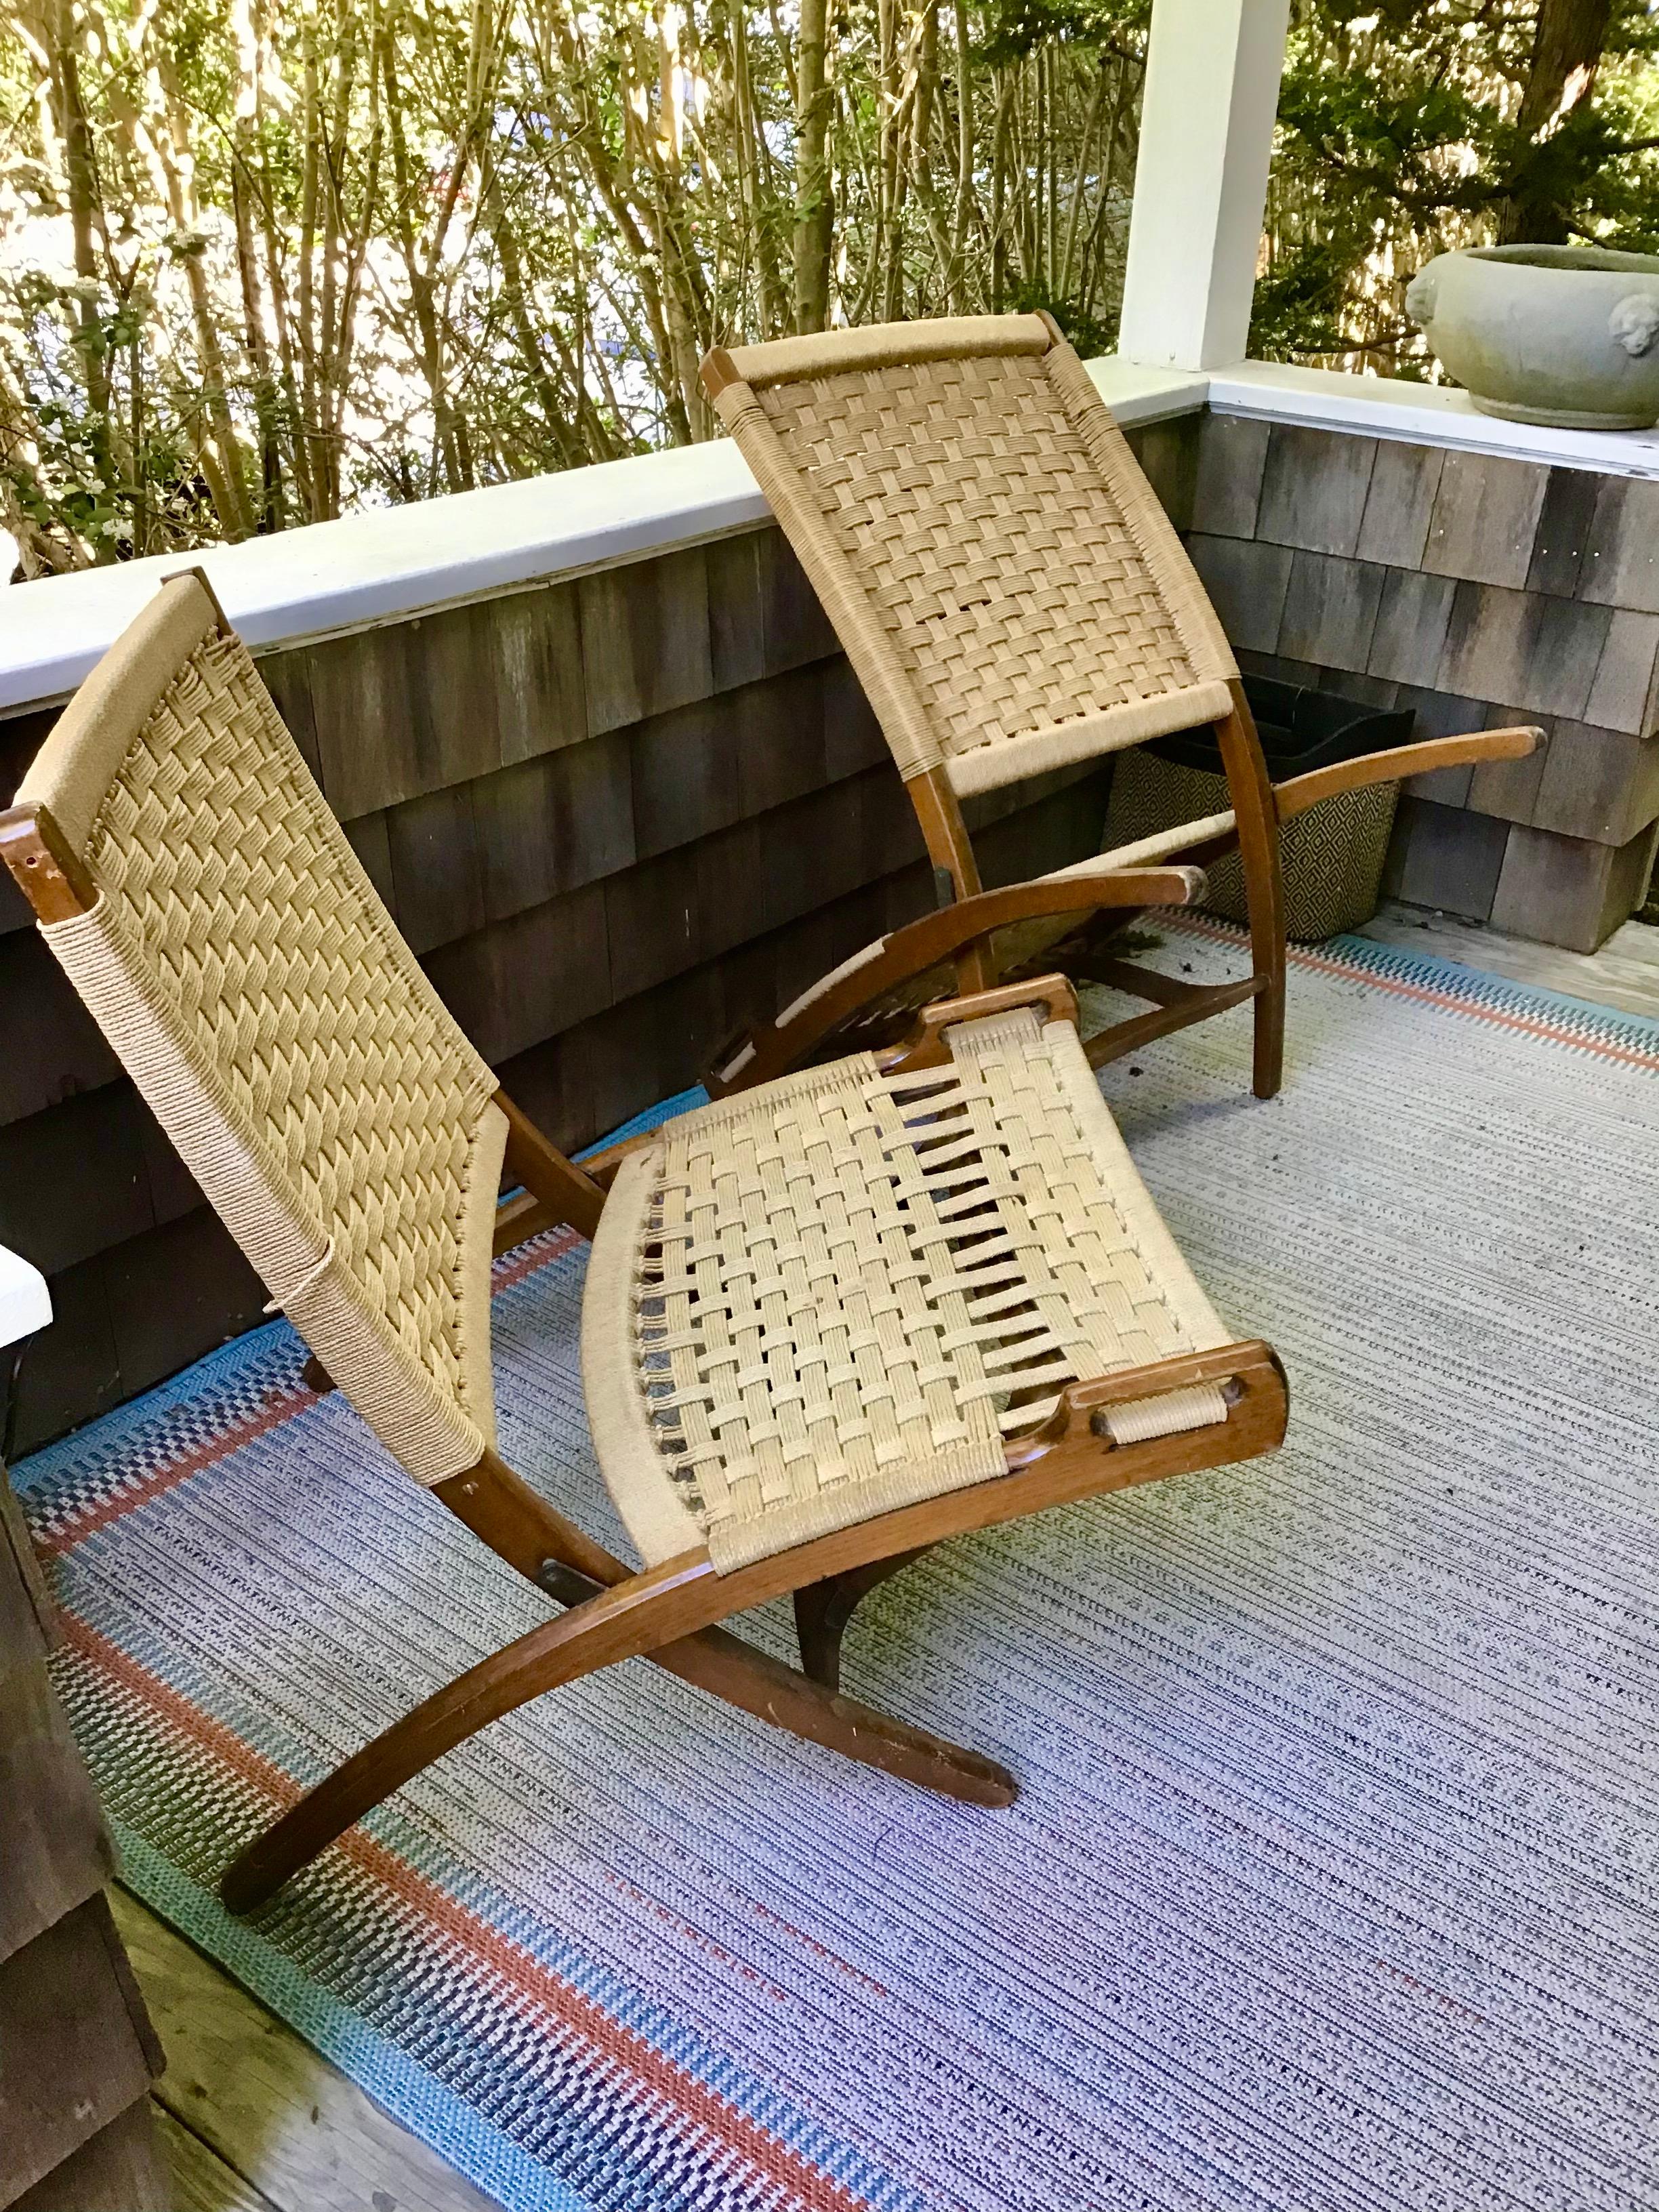 Pair of mid century Hans Wegner style folding chairs. Instead of cane, these seats are made of woven rope. The mid century chairs fold up easily and can be used in the yard, porch living room or beach. The Scandinavian modern chairs are in good